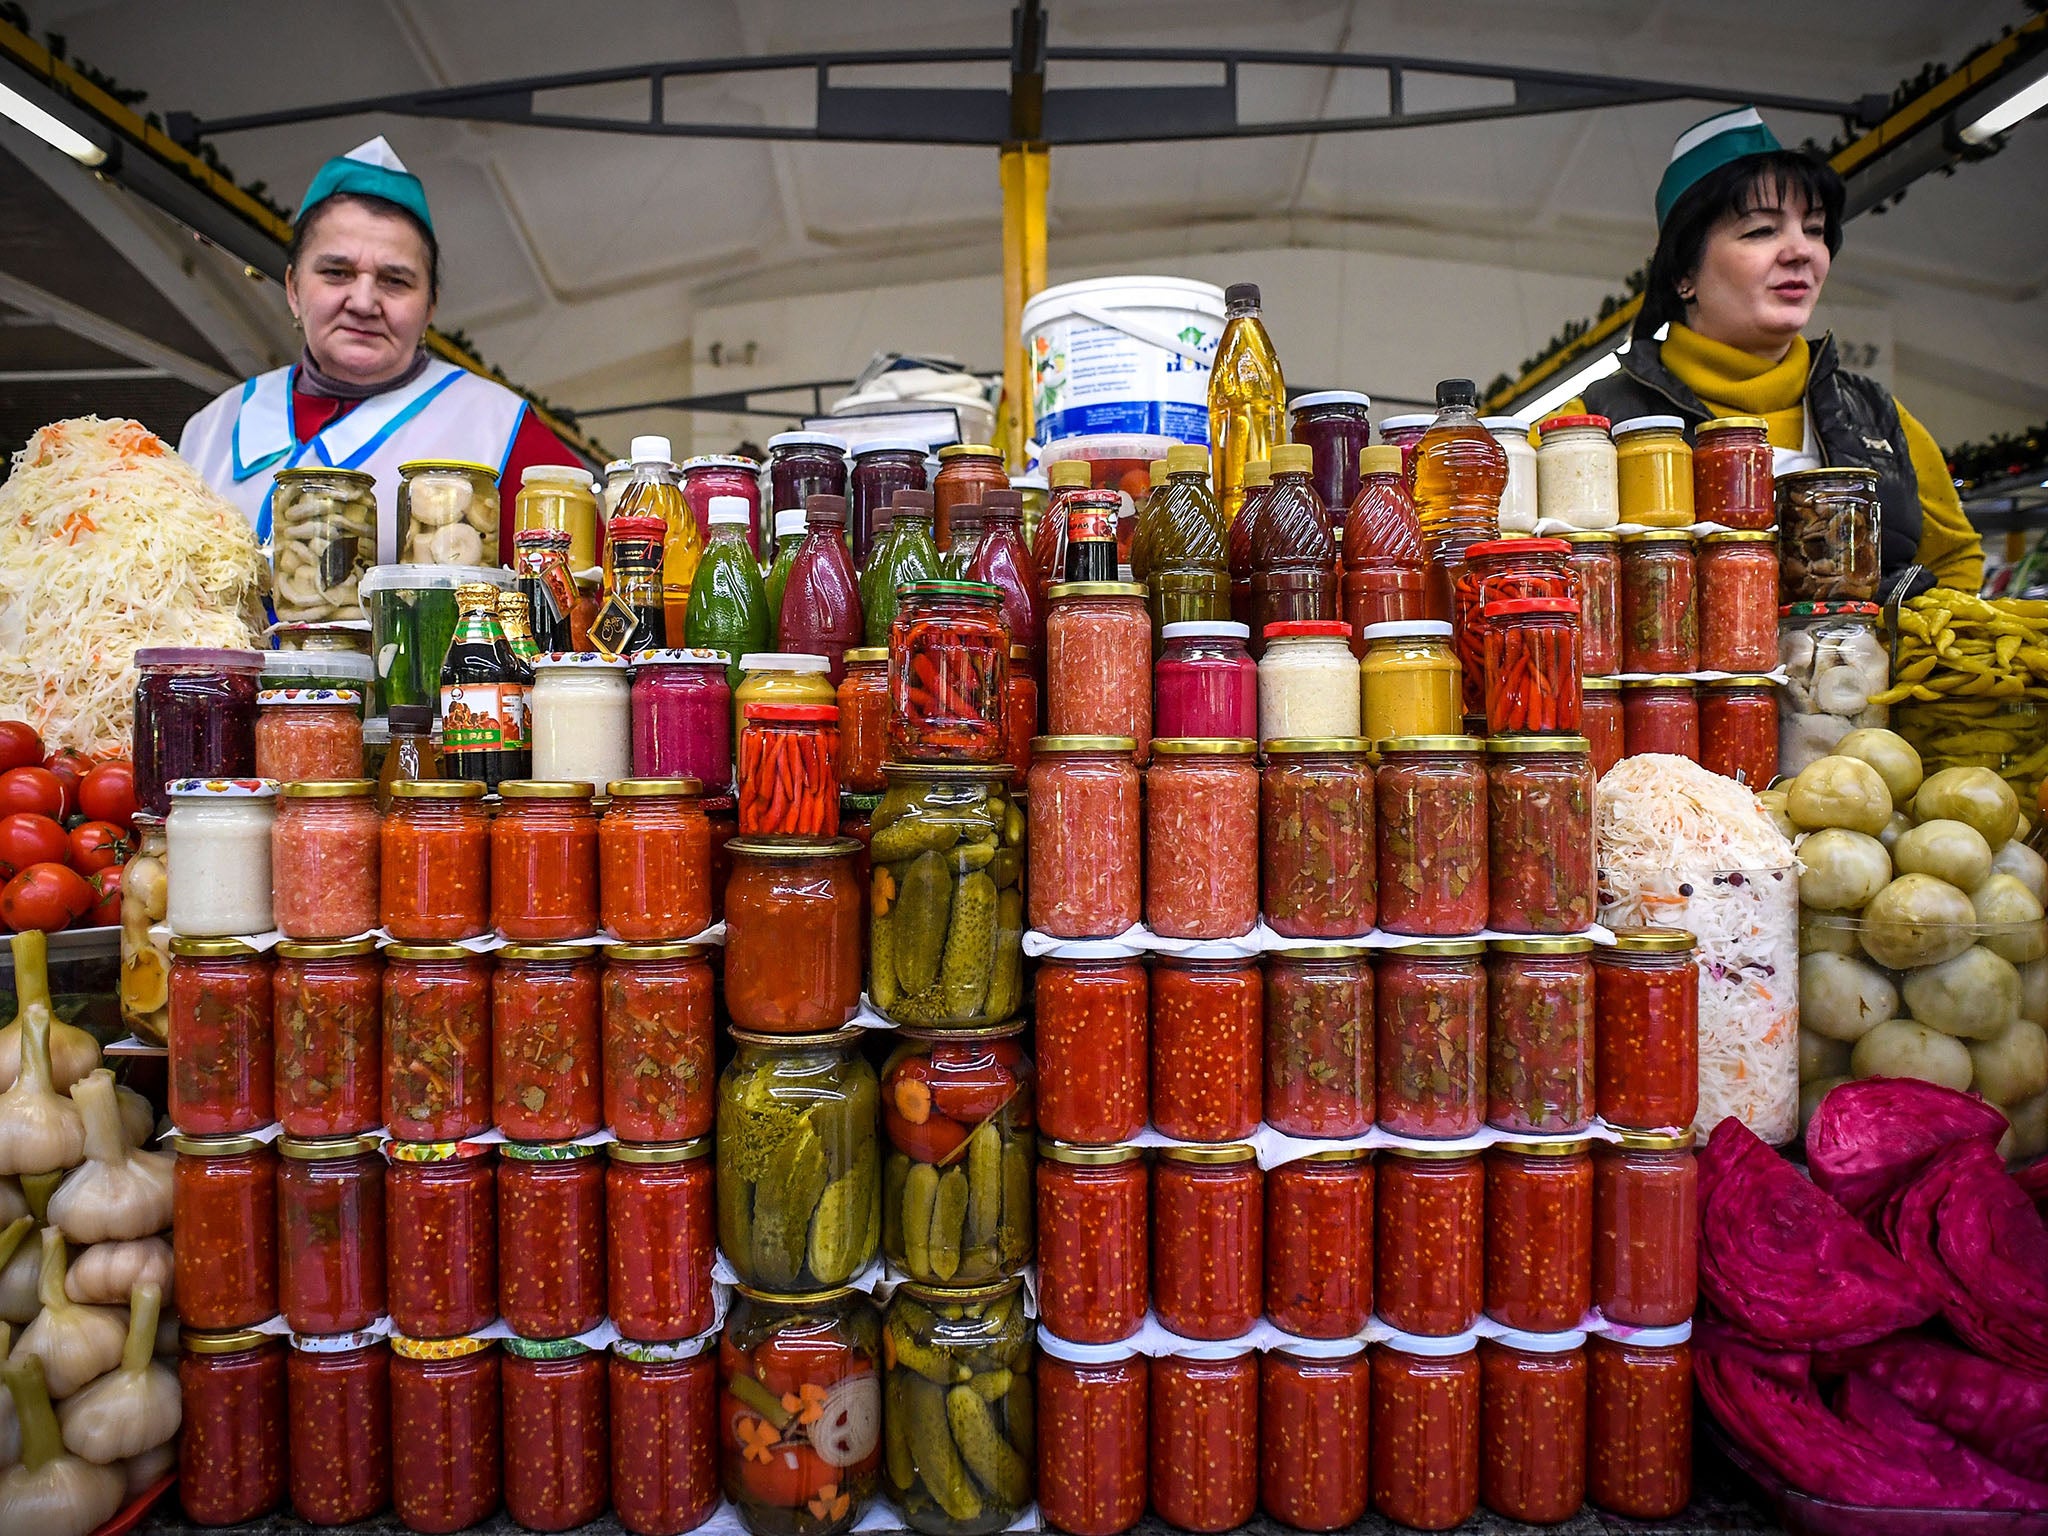 Traders sell pickles at a market in Moscow – food prices shot up after sanctions were imposed in 2014 (AFP/Getty)